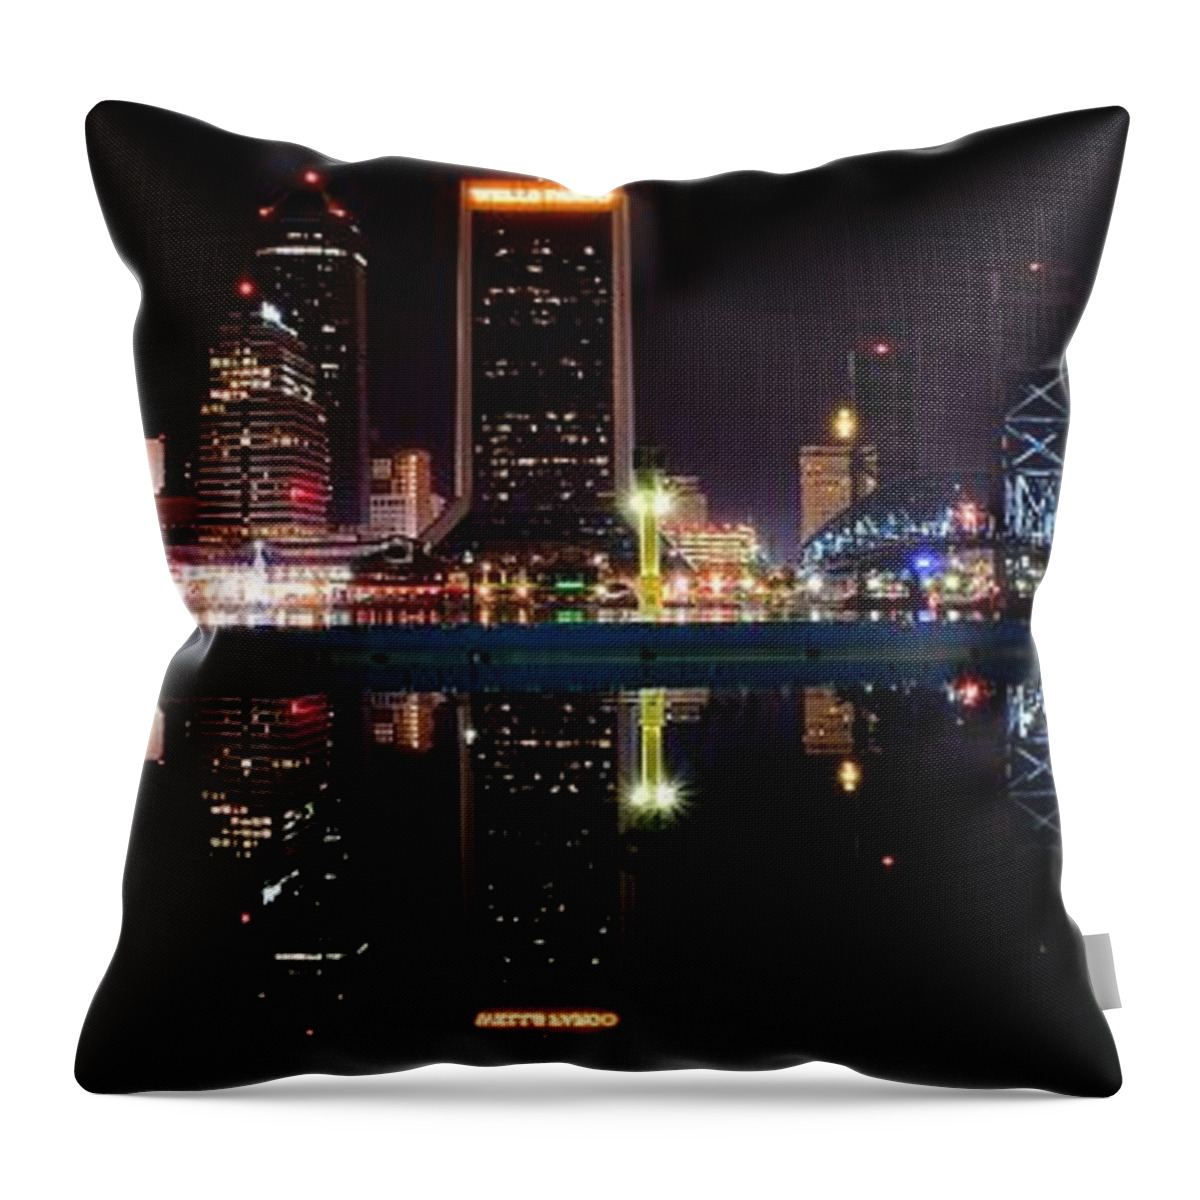 Jacksonville Throw Pillow featuring the photograph Jacksonville Panoramic by Frozen in Time Fine Art Photography